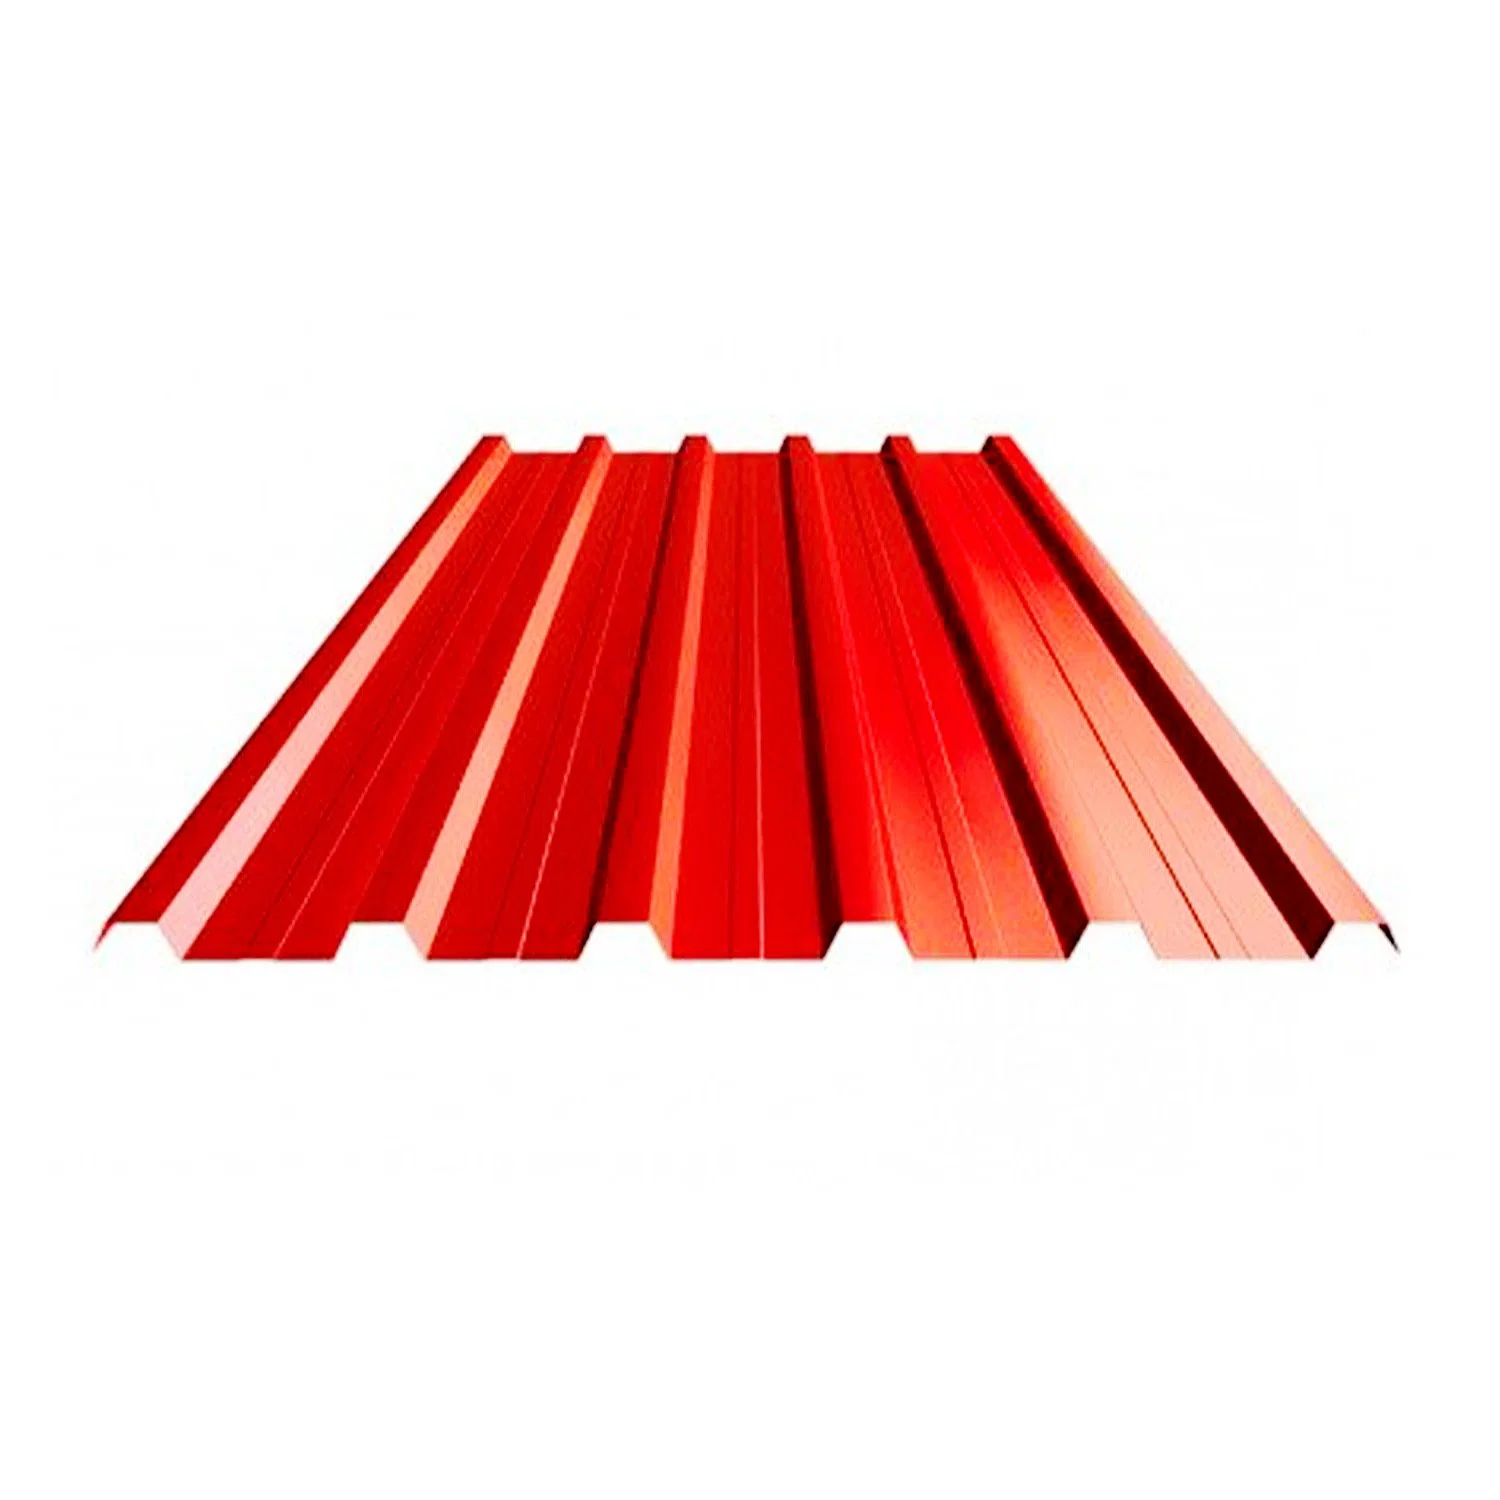 High quality/High cost performance Corrugated Steel Roofing Sheet 915 950 988 1025 1040 1060mm Width 10 12FT for Roof Panel SGS BV Fast Delivery Time